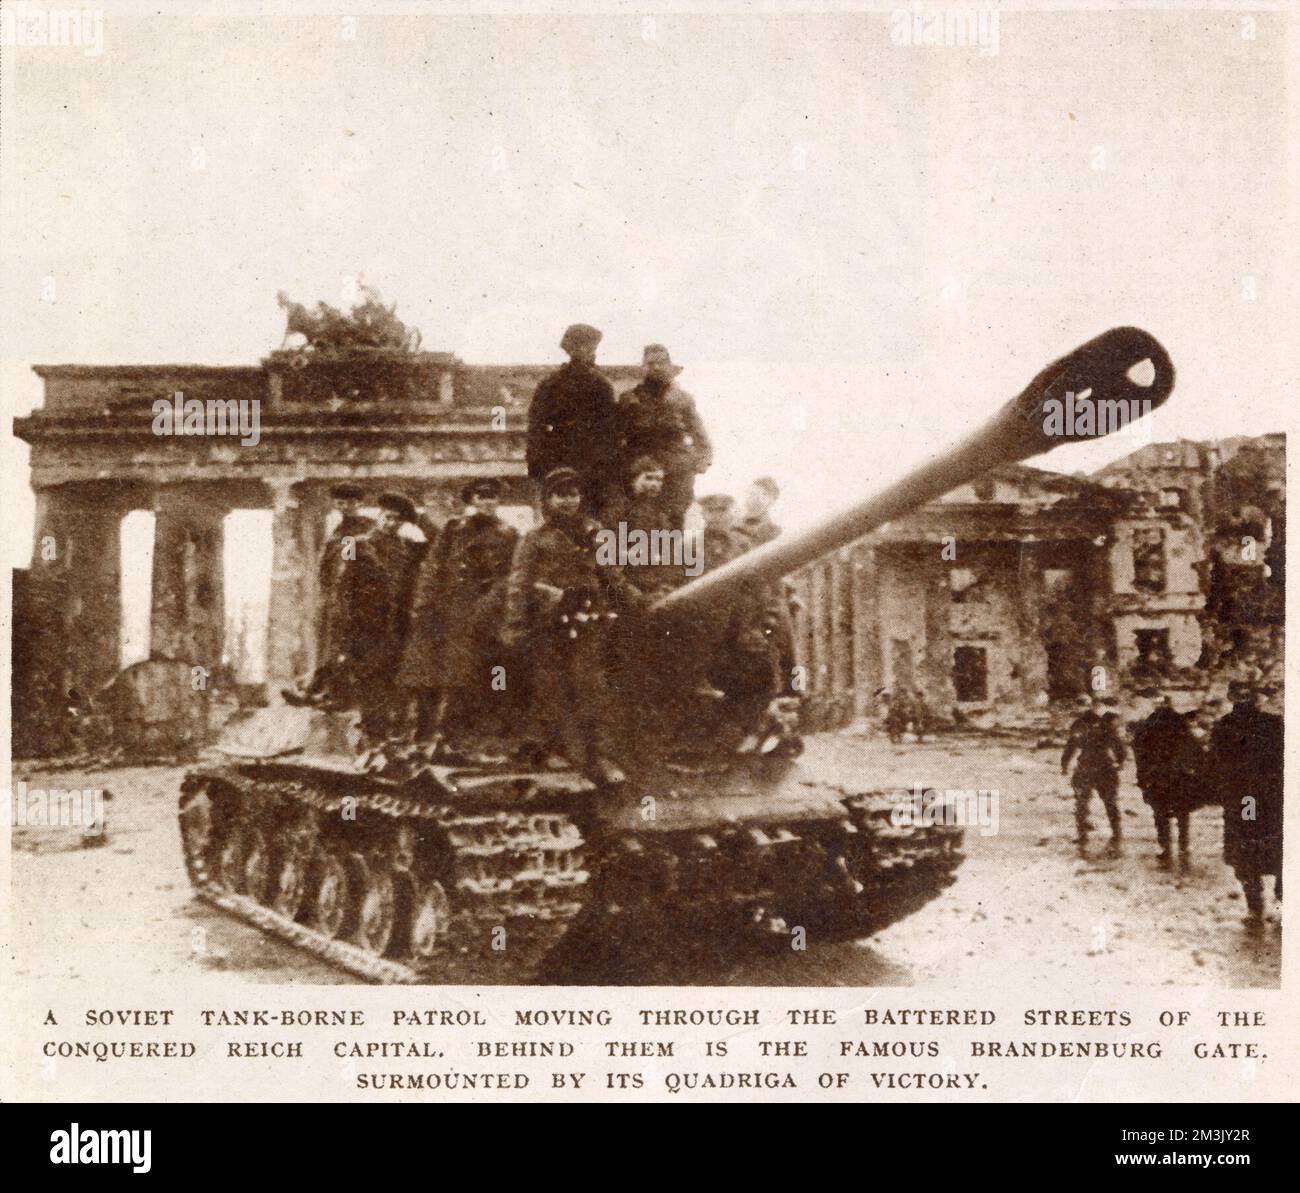 A Soviet heavy tank moving through Berlin, with the Brandenburg Gate in the background, May 1945.   Berlin fell to the Russian Army on 2nd May 1945, after a battle which lasted 17 days. Given the demeanour of the men riding on the tank, it is safe to assume that this photograph was taken after the German capitulation. Stock Photo